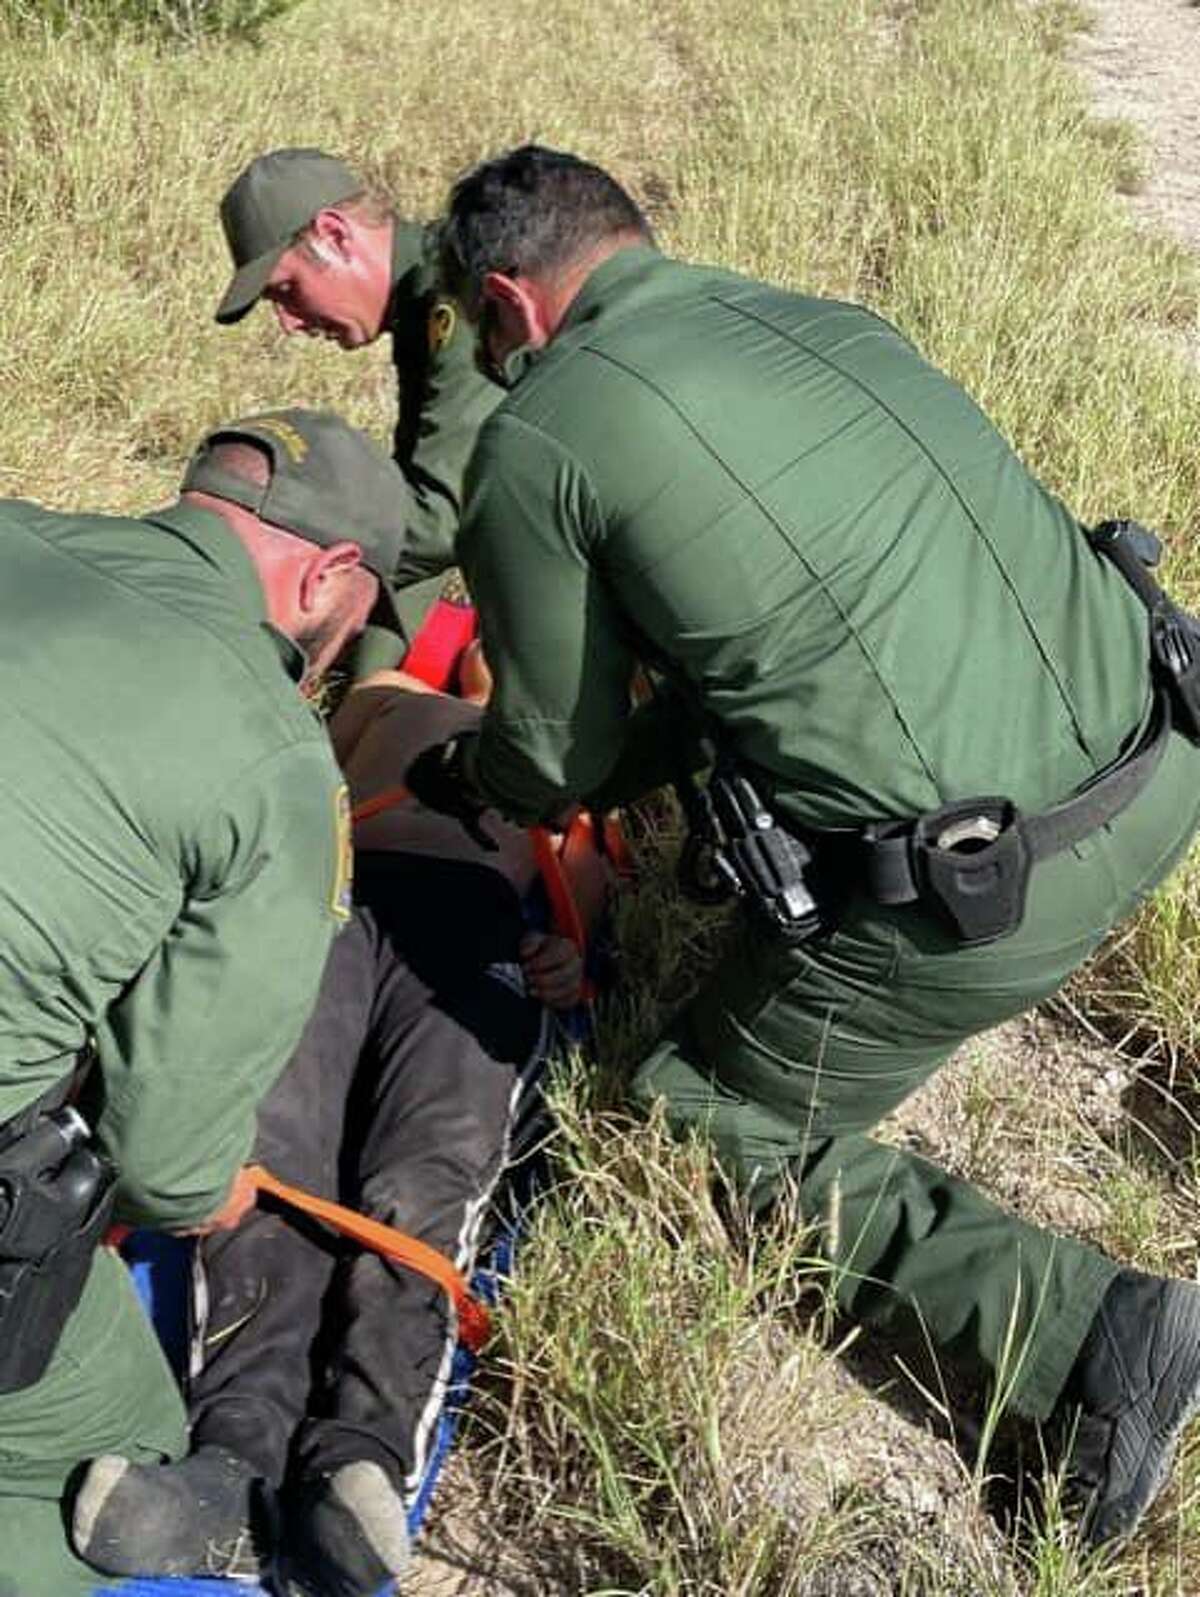 An 18-year-old Mexican national was discovered in need of medical attention near Hebbronville recently.